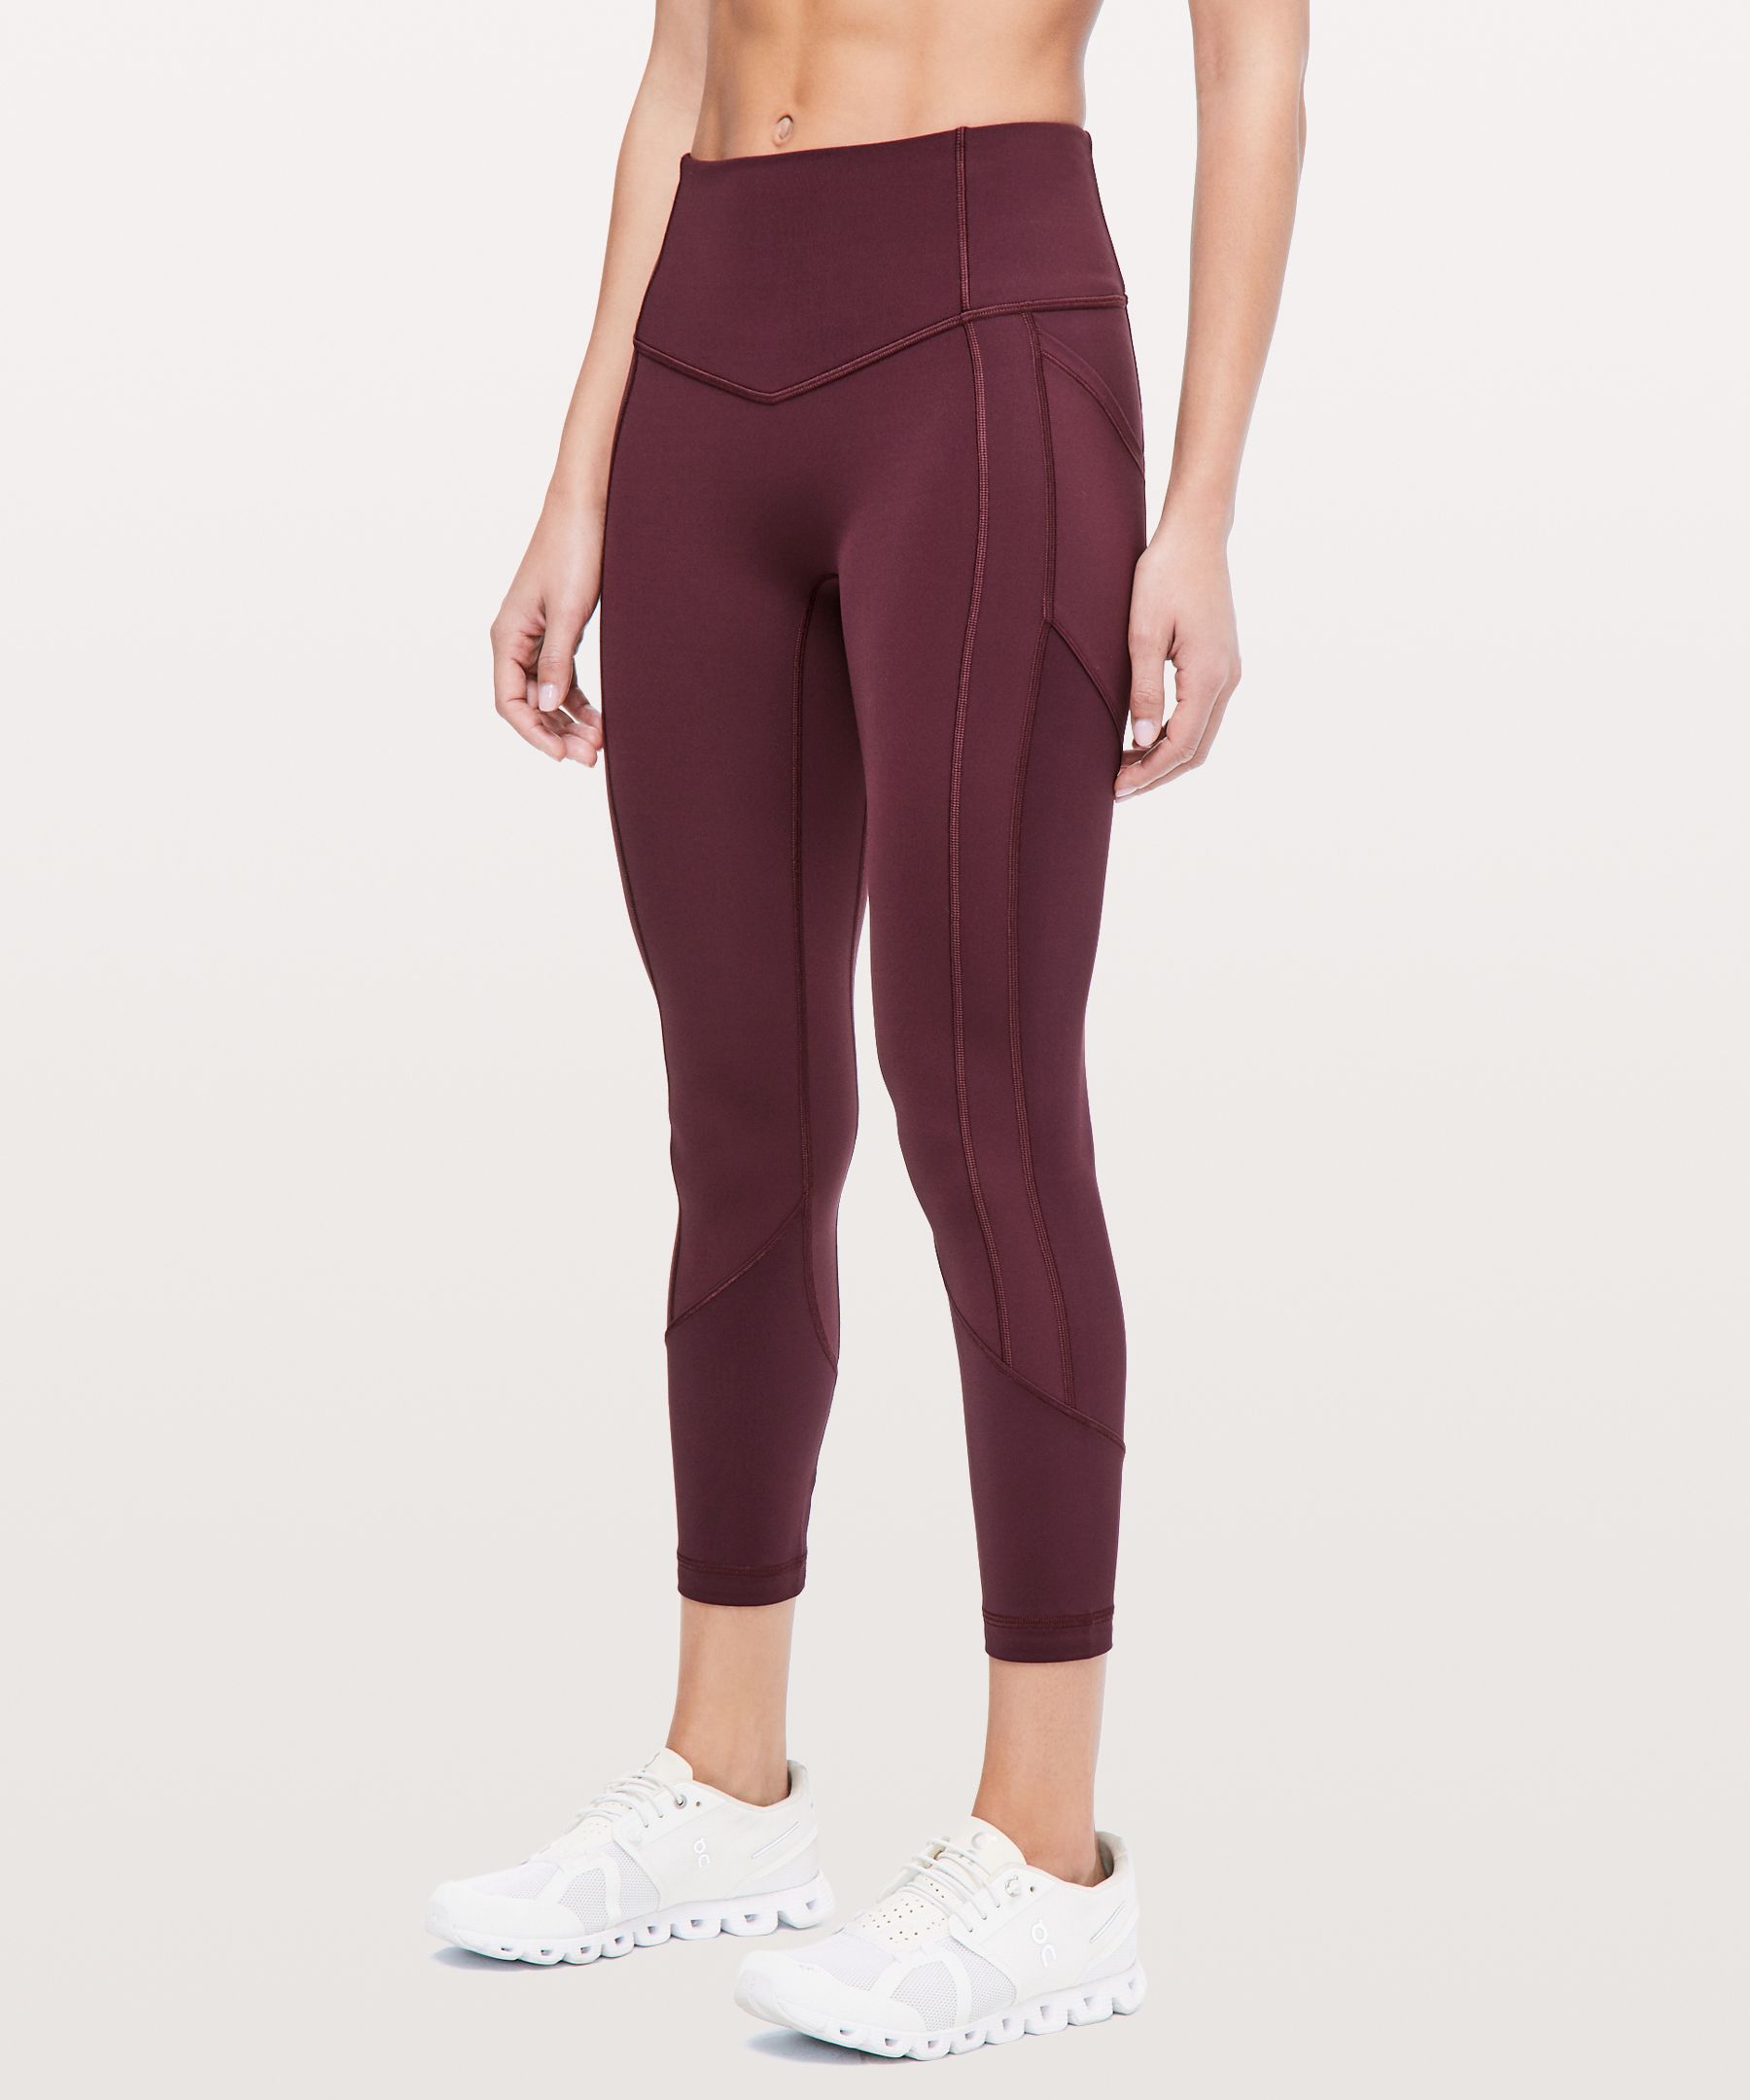 Lululemon All The Right Places High-rise Crop 23" In Dark Adobe